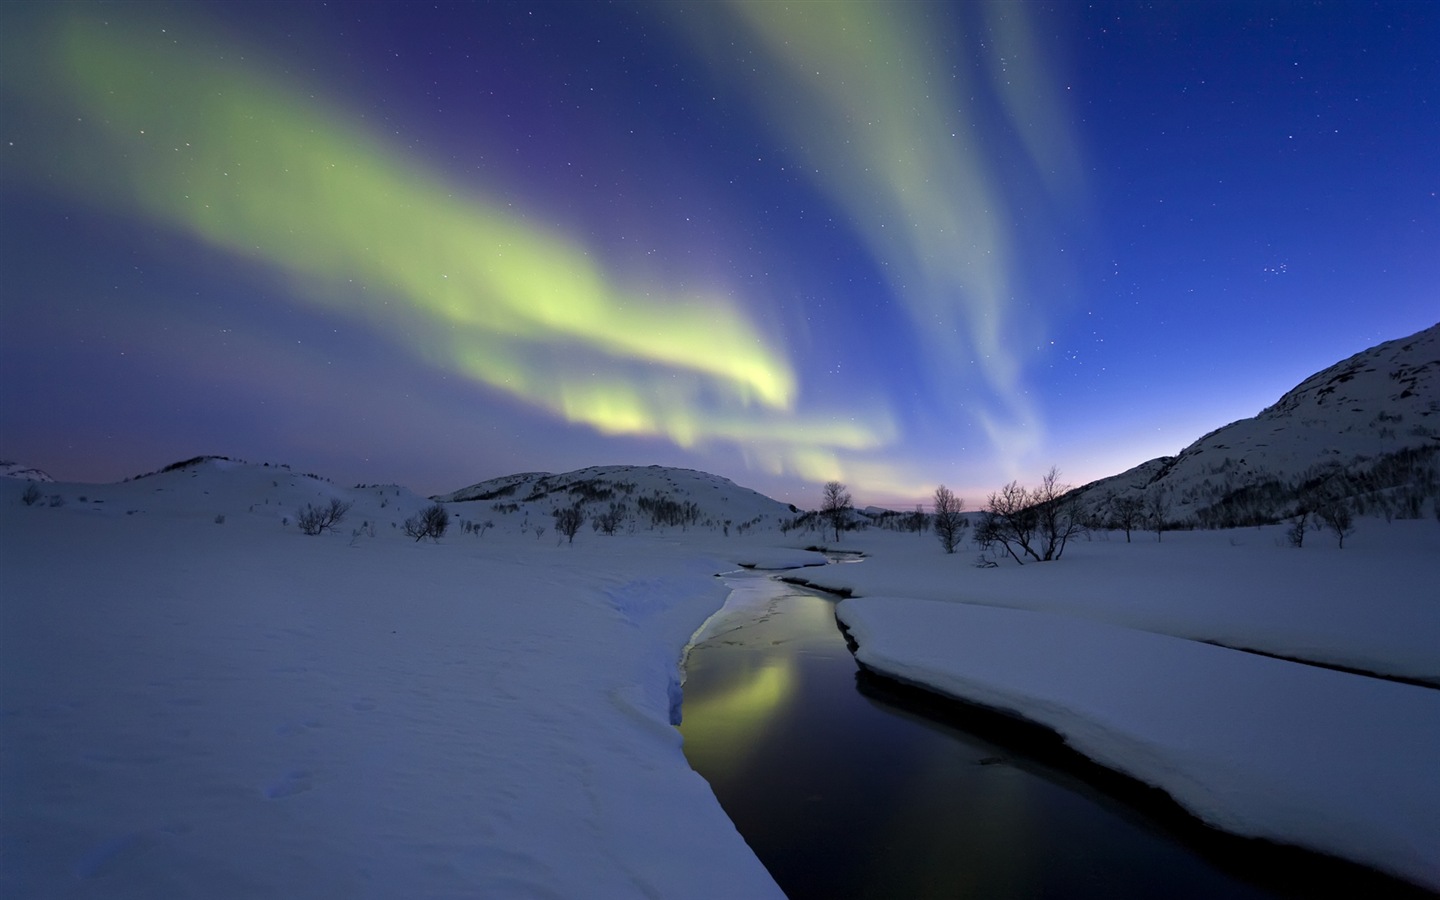 Natural wonders of the Northern Lights HD Wallpaper (2) #19 - 1440x900